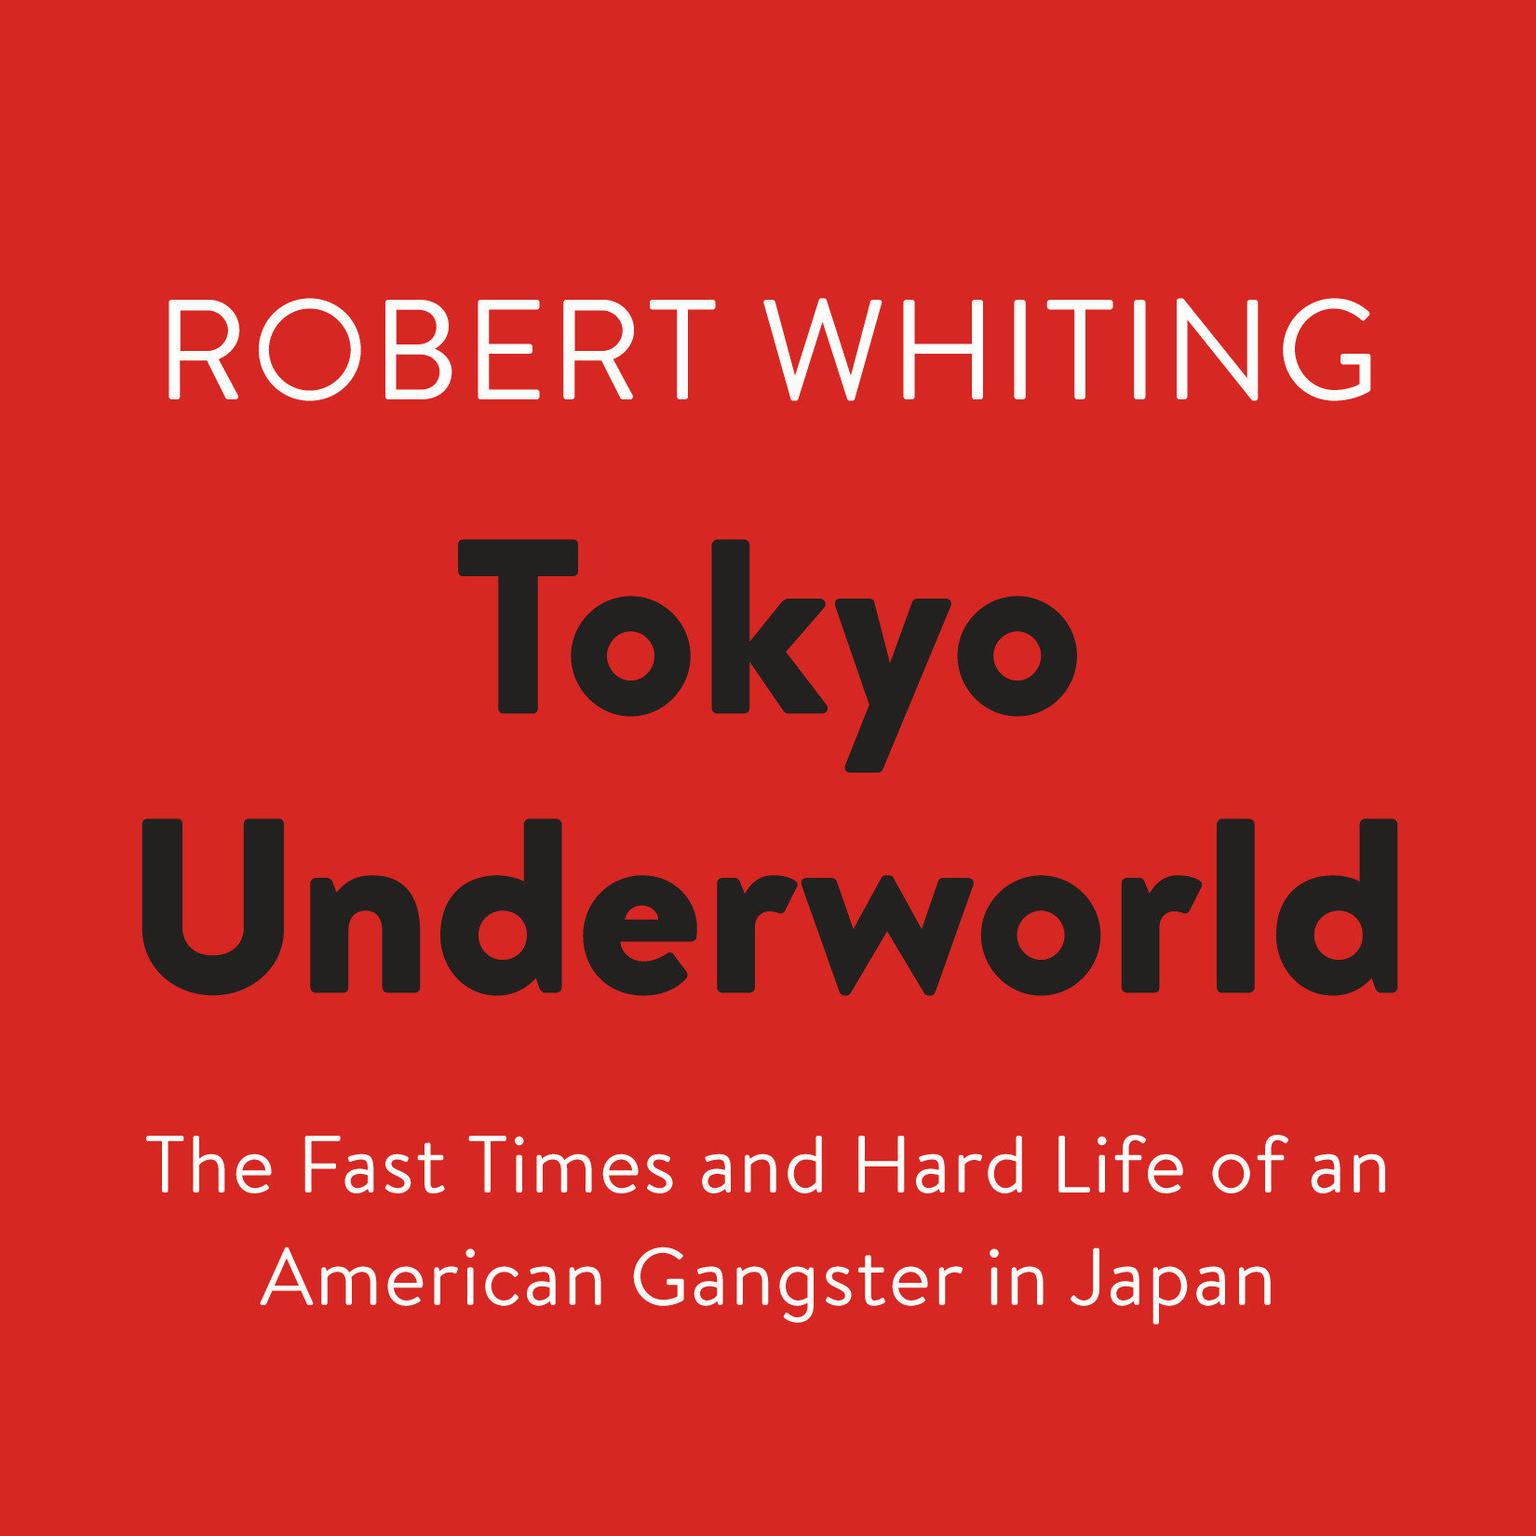 Tokyo Underworld: The Fast Times and Hard Life of an American Gangster in Japan Audiobook, by Robert Whiting